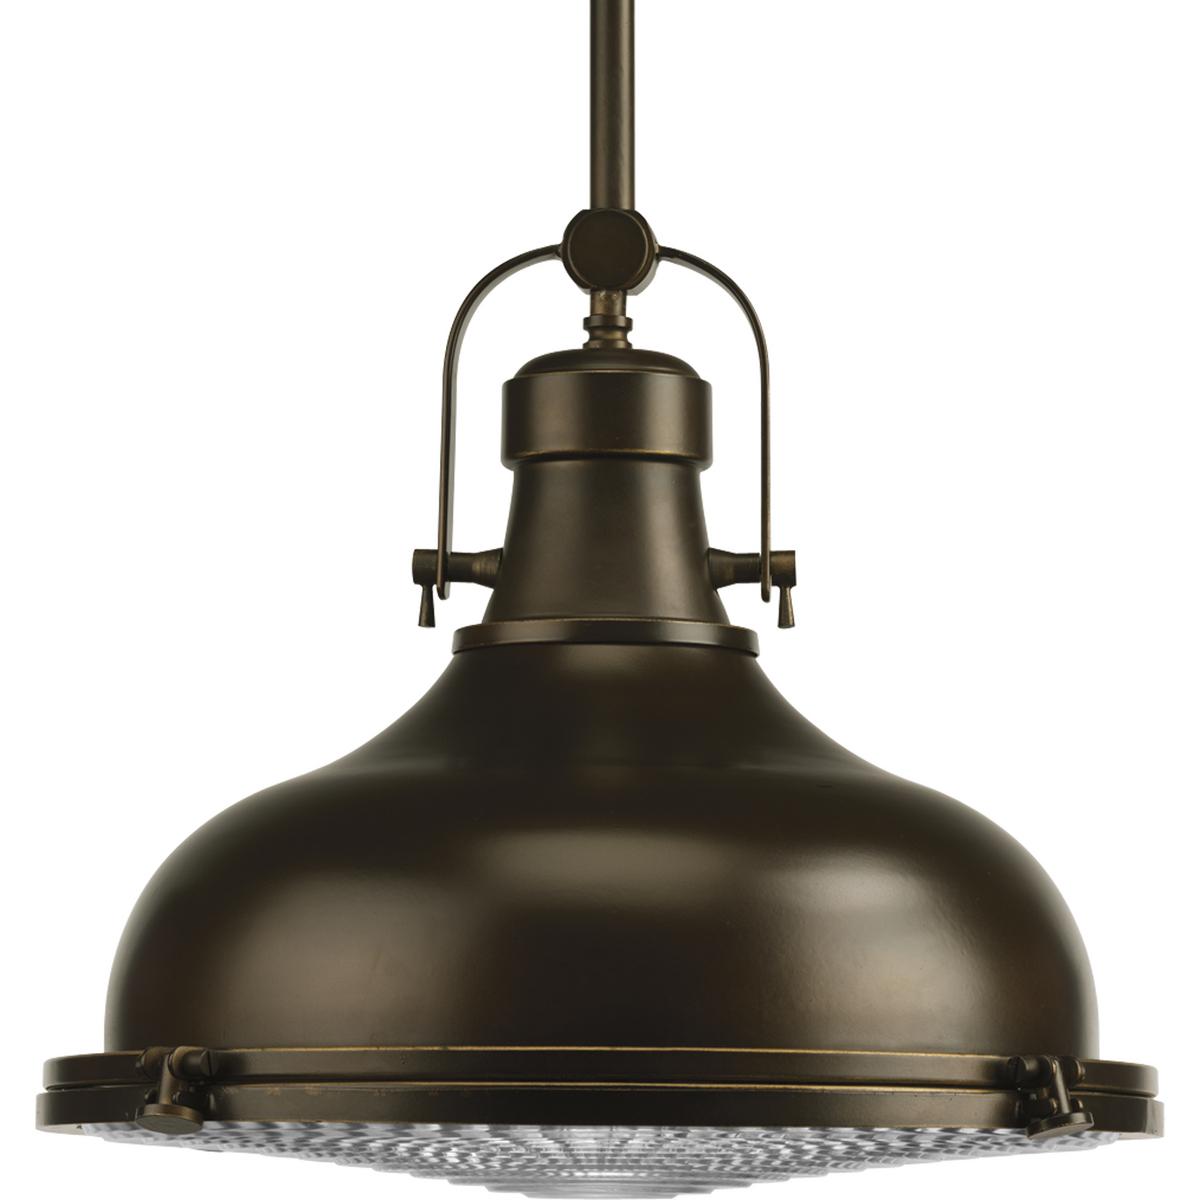 Hubbell P5197-108 The one-light 16" LED pendant features industrial roots in both form and function. The Oil Rubbed Bronze finish highlight the high-quality prismatic glass which adds to the historical aesthetic. Antique style fixture includes a hinge-locking nautical desi